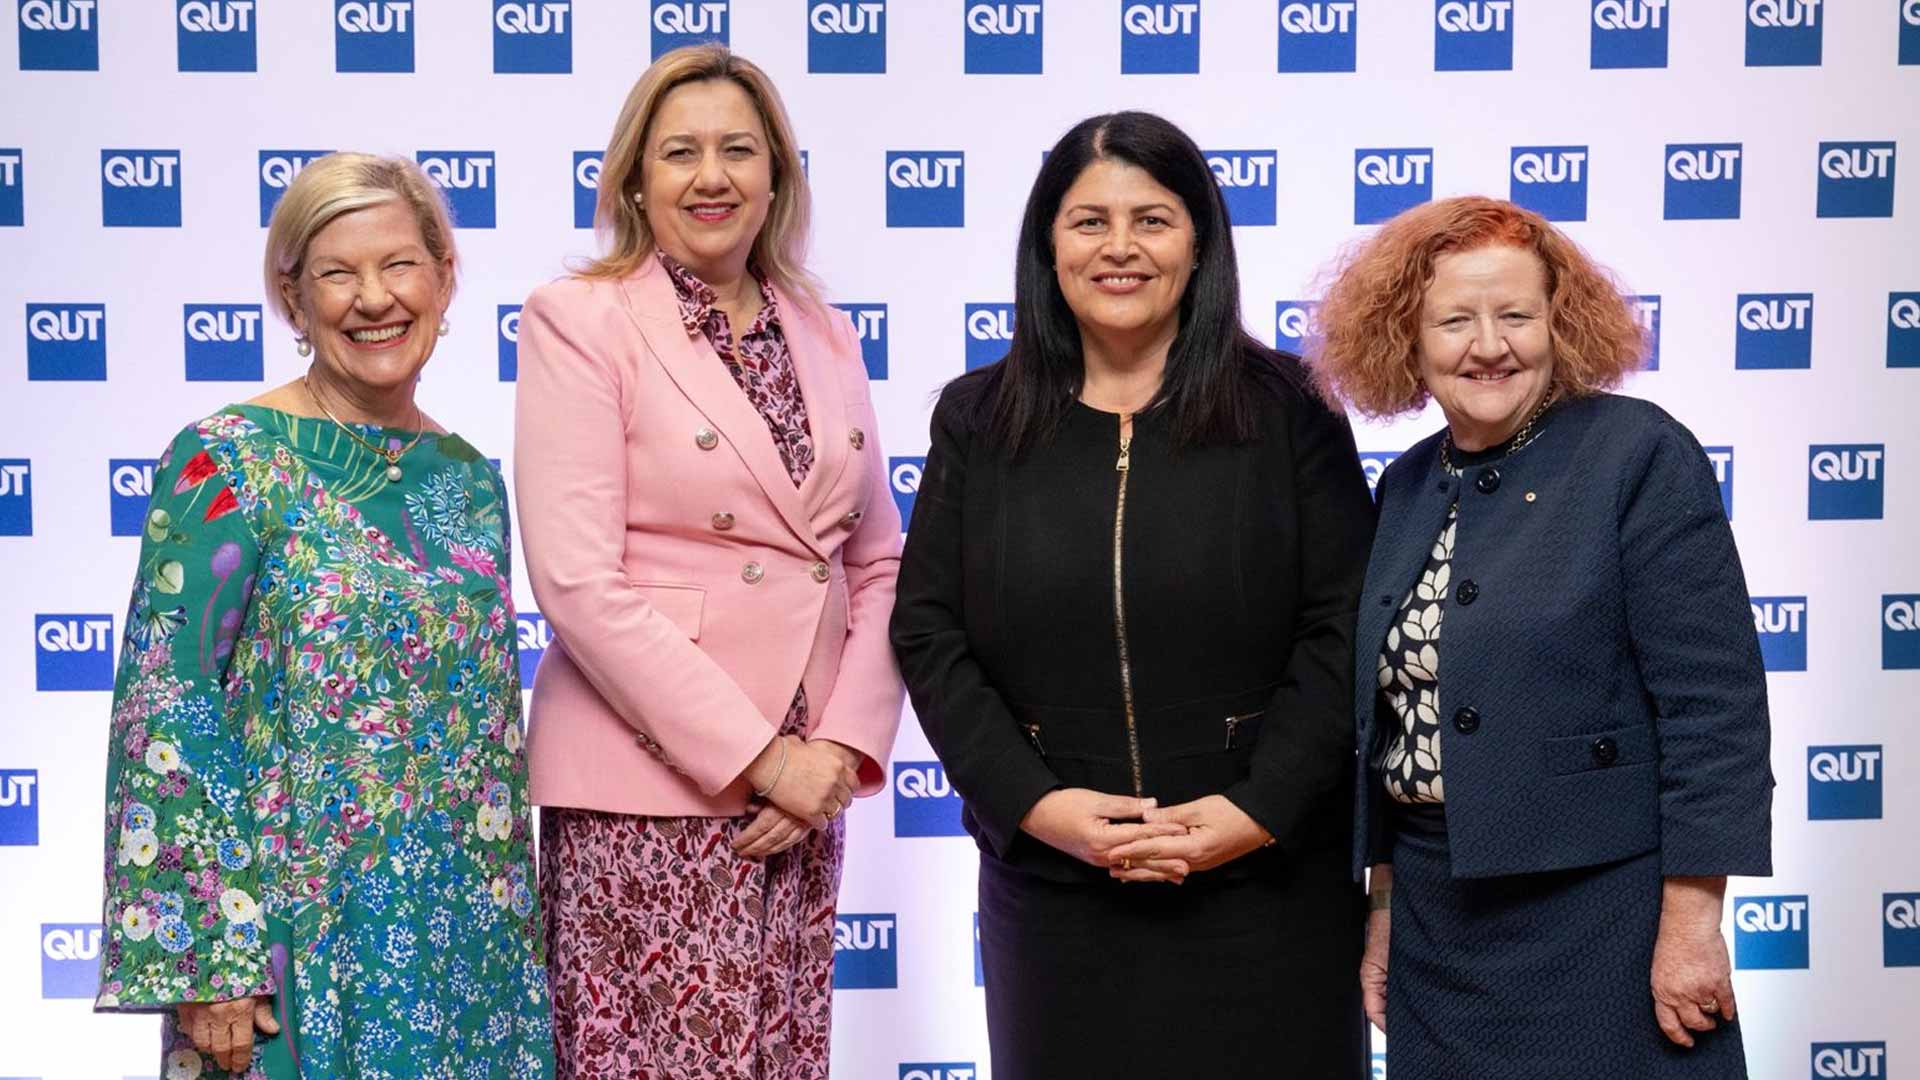 Four smartly dressed women pose in front of a media wall with the blue QUT repeated across it.